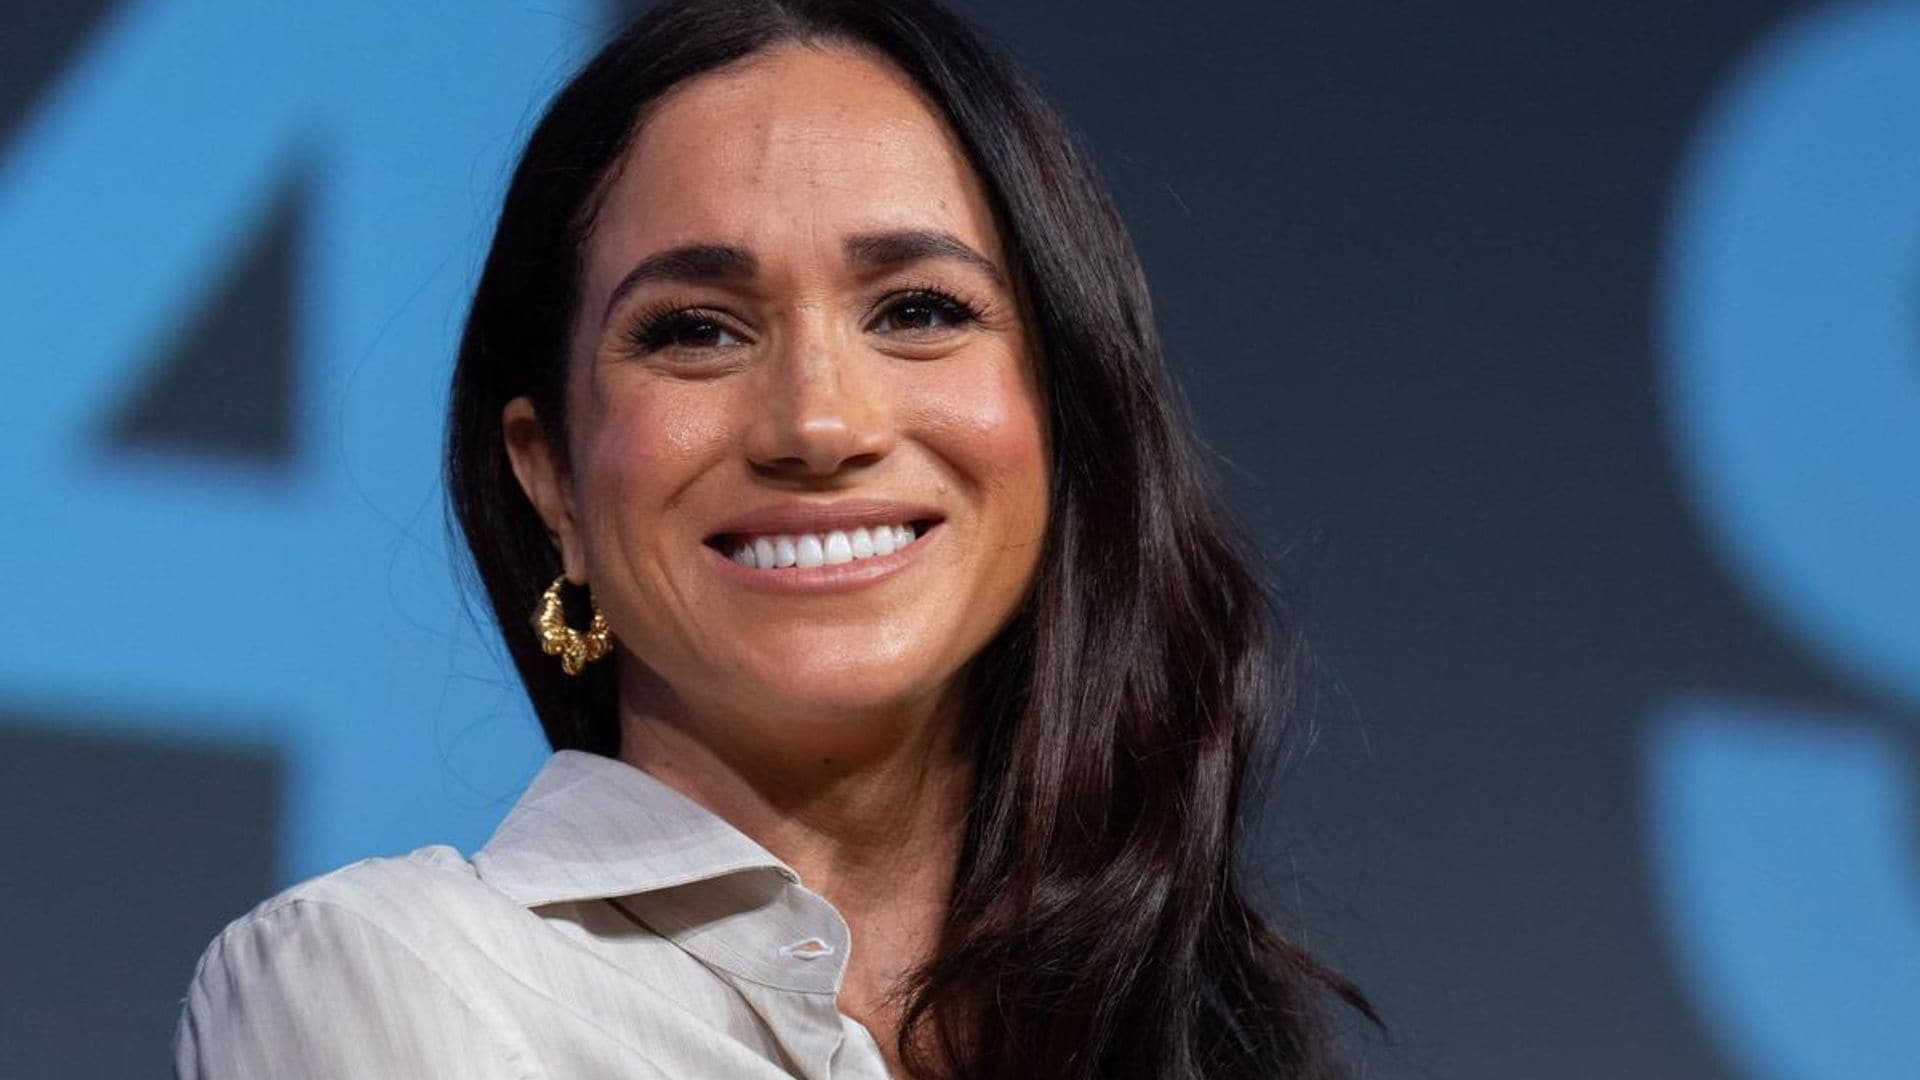 Meghan Markle has photo shoot with kids Prince Archie and Princess Lilibet: report